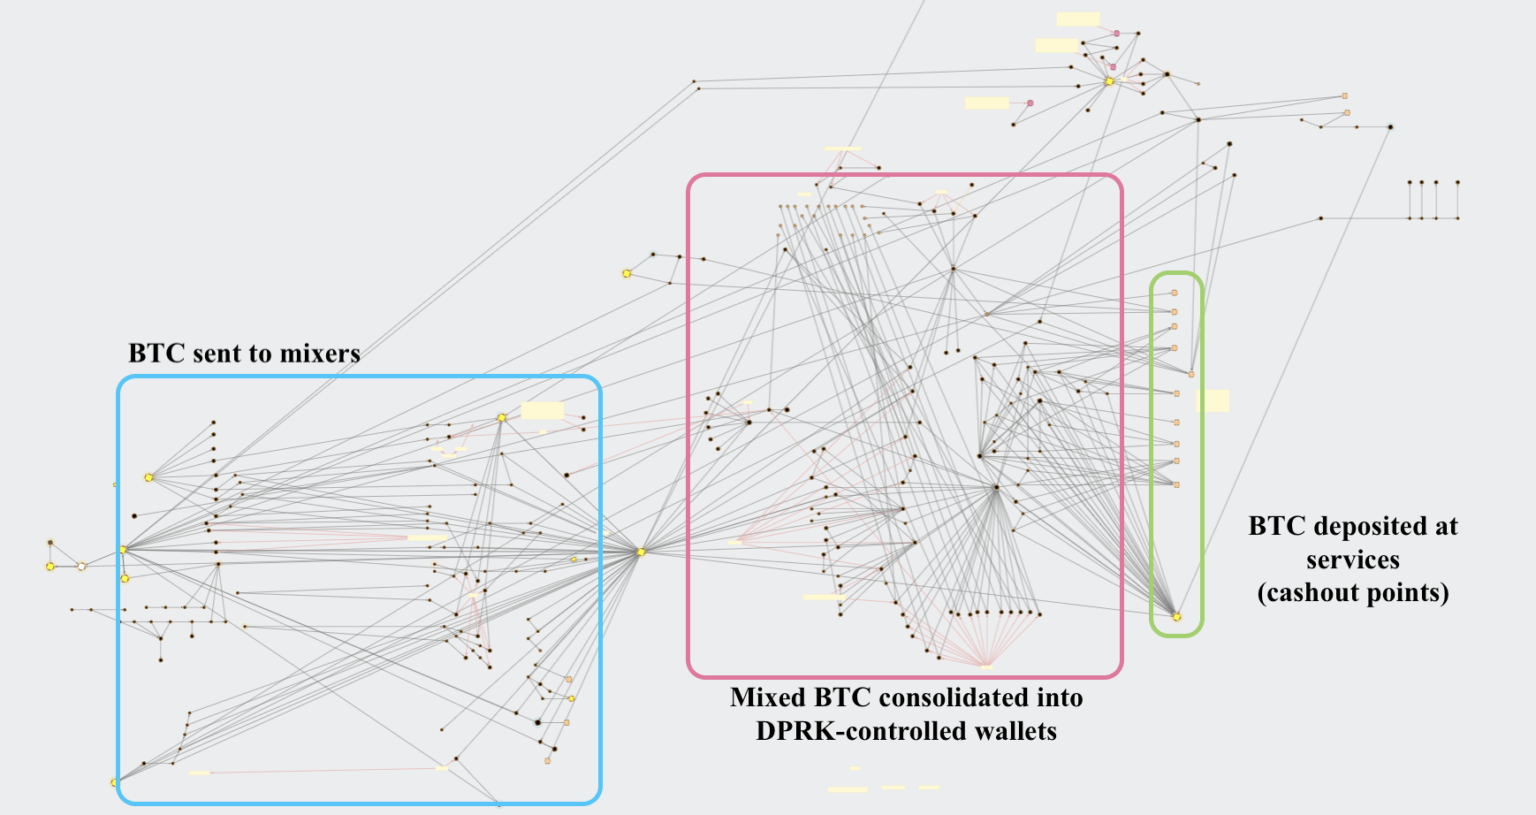 Laundering process visualization: Bitcoin is mixed, consolidated into new wallets, and deposited at crypto-to-fiat exchange services for cash out (Chainalysis)